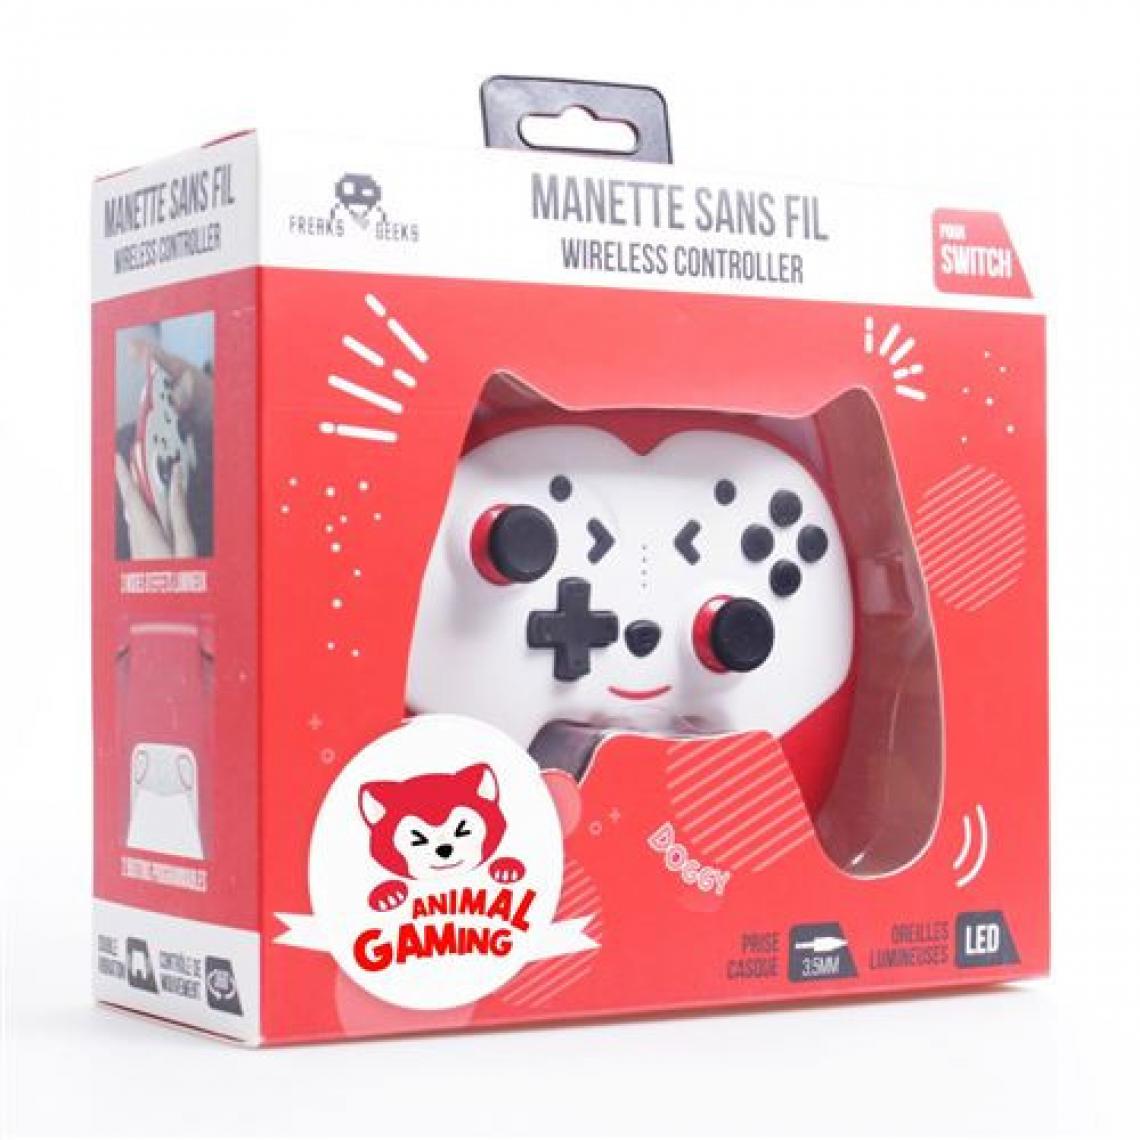 Freaks And Geeks - Manette Gaming sans fil pour enfant Freaks And Geeks Edition Doggy Rouge - Joystick